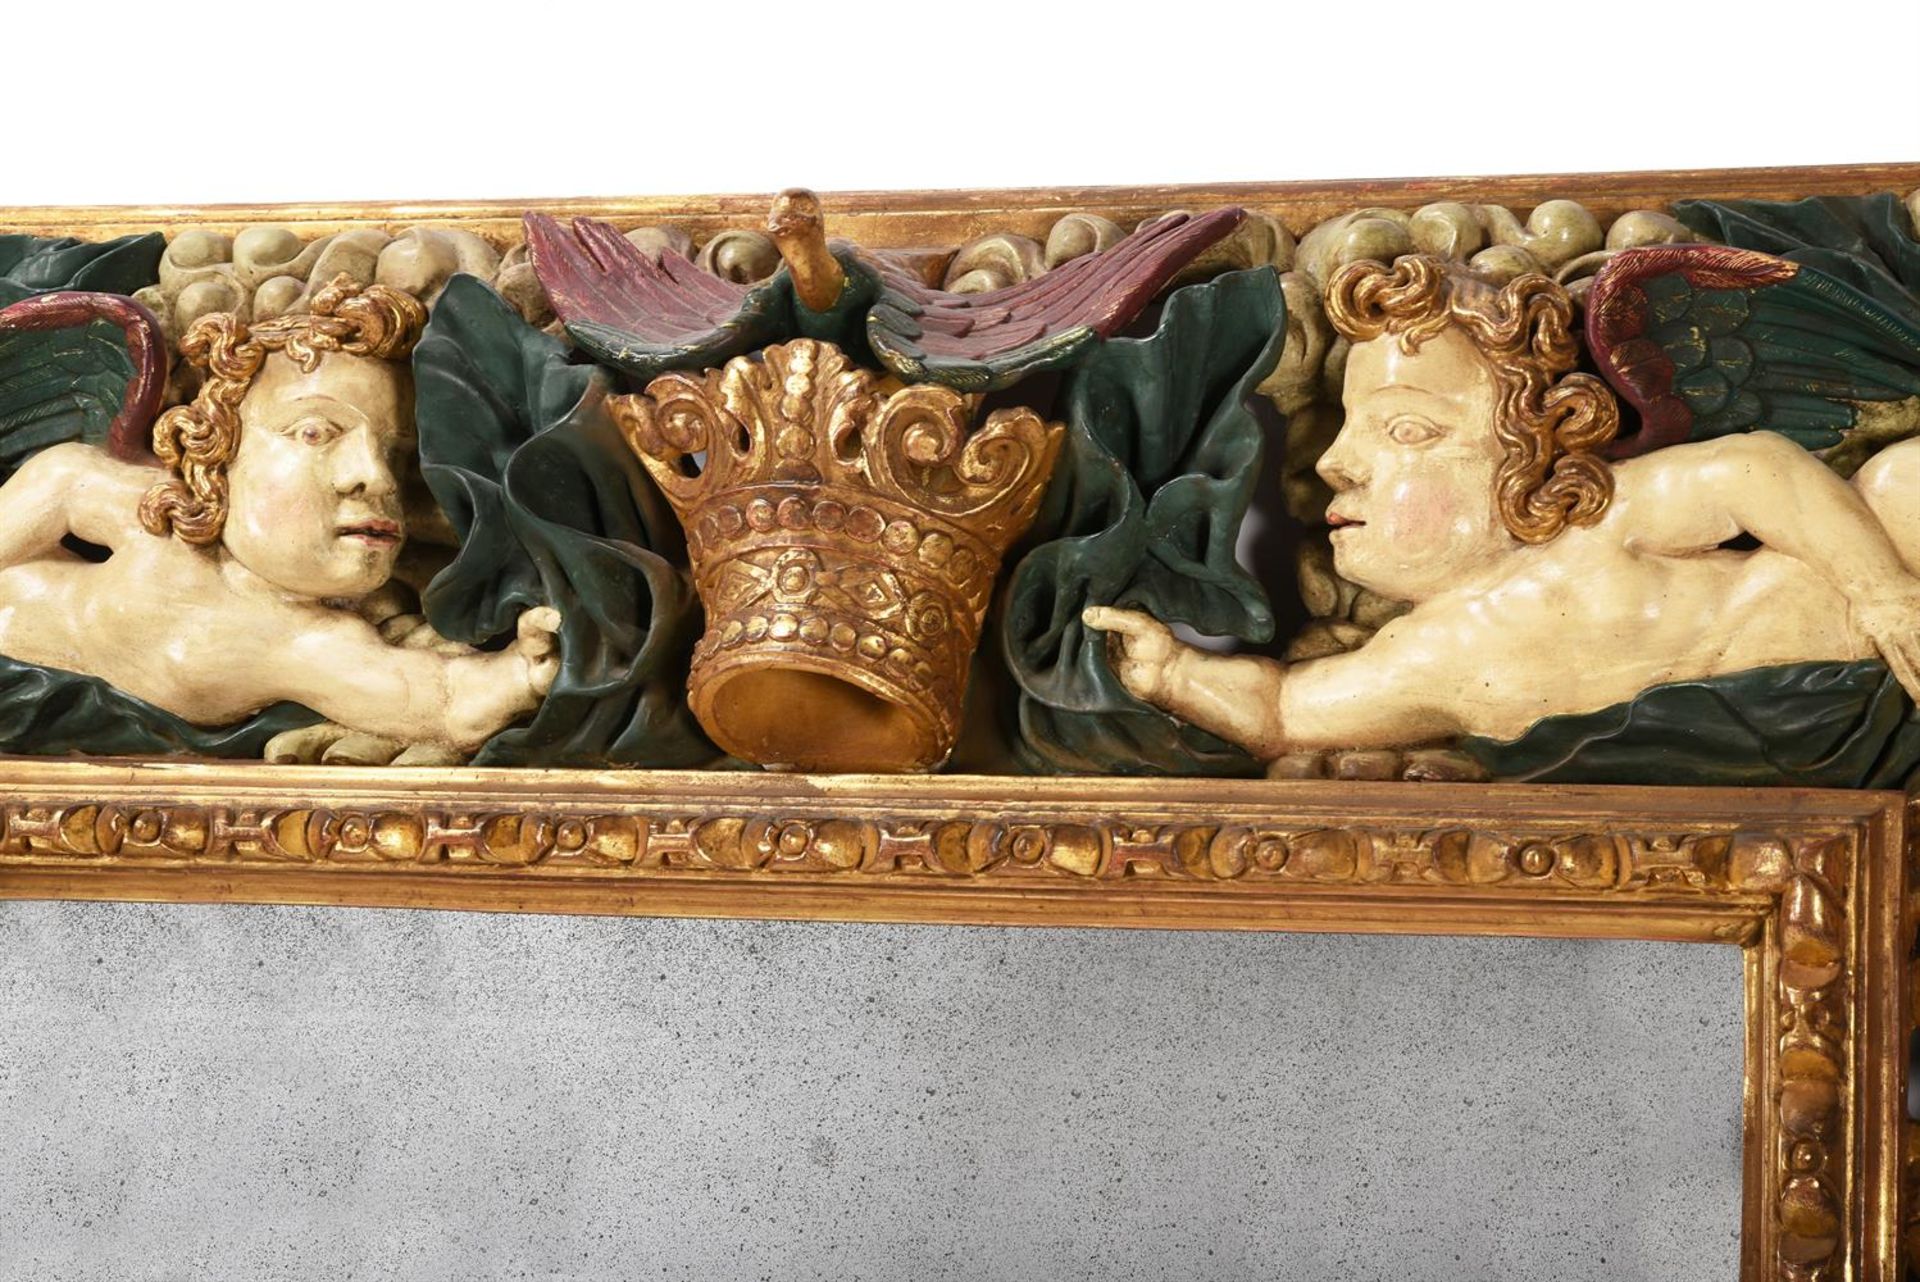 A CONTINENTAL CARVED GILTWOOD AND PAINTED MIRROR, SOUTH GERMAN OR AUSTRIAN, 17TH CENTURY AND LATER - Image 3 of 6